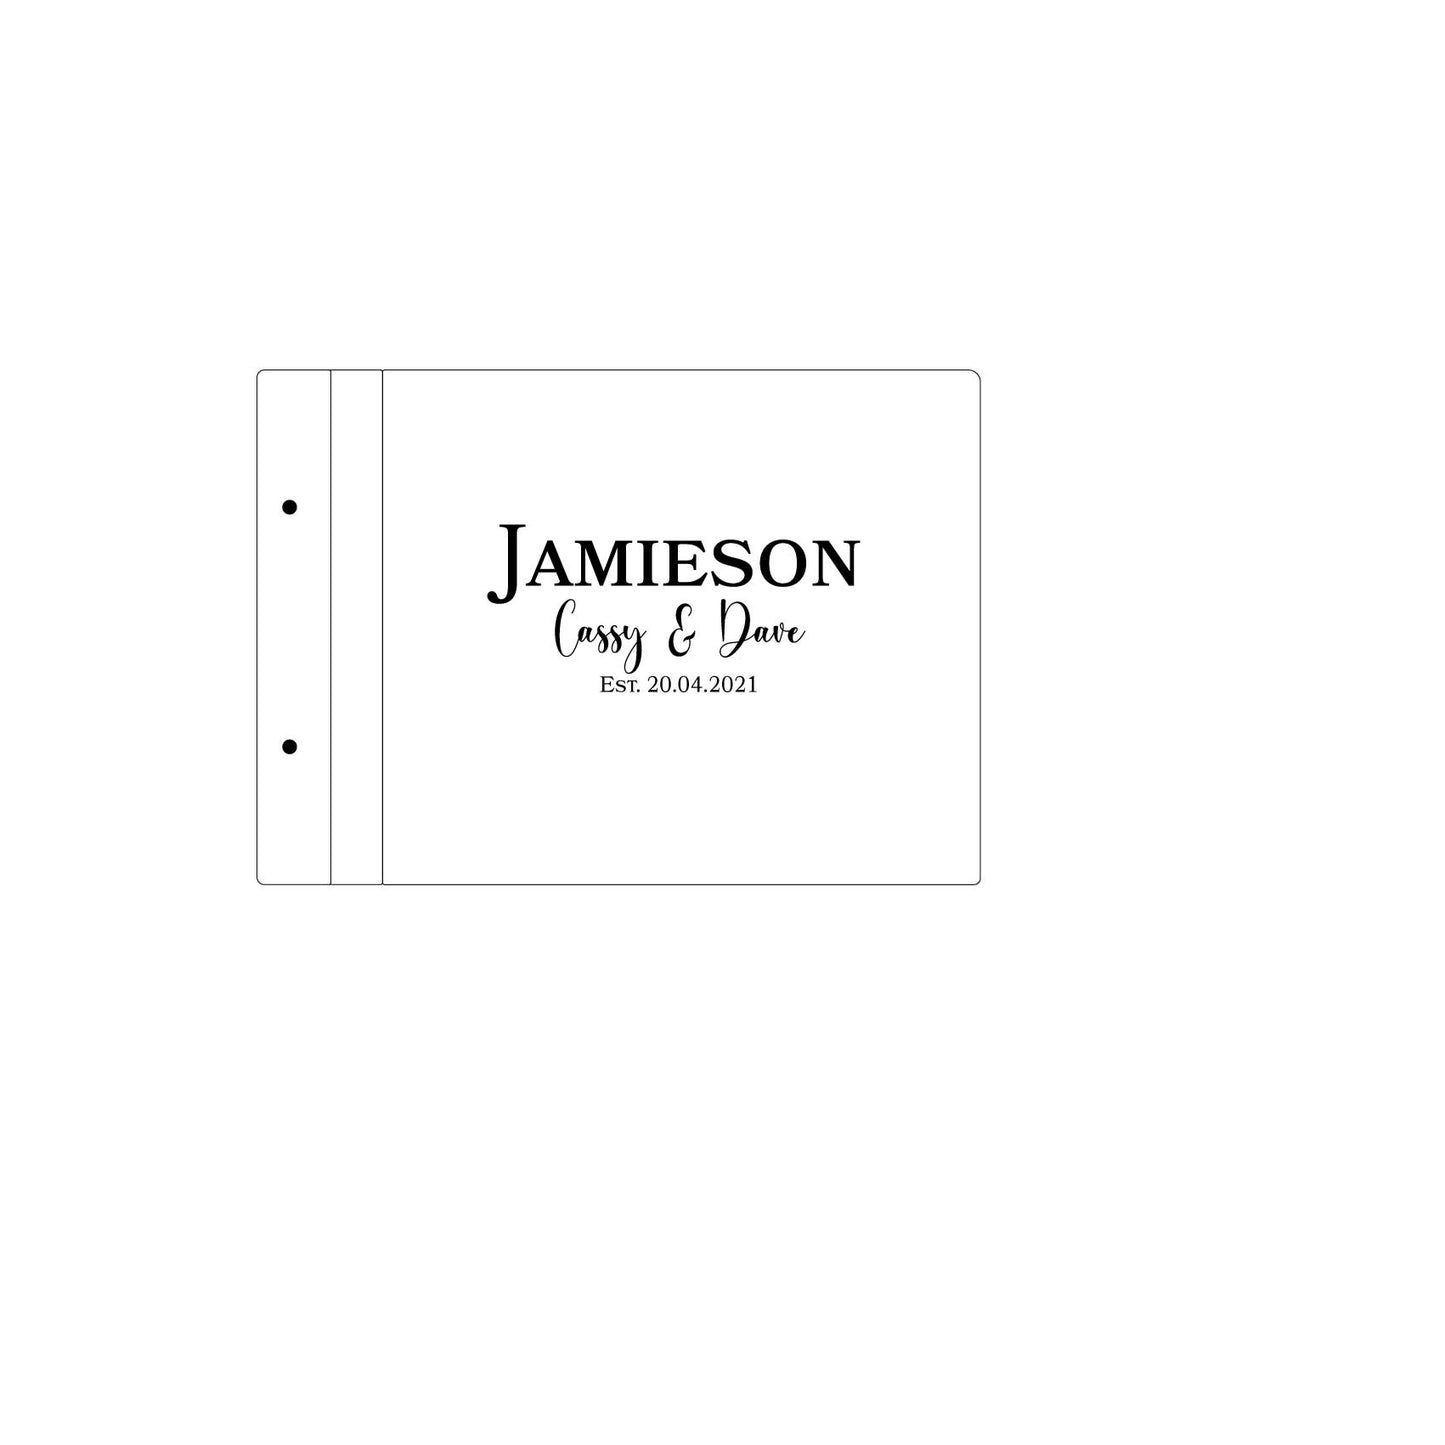 The Jamieson guest book